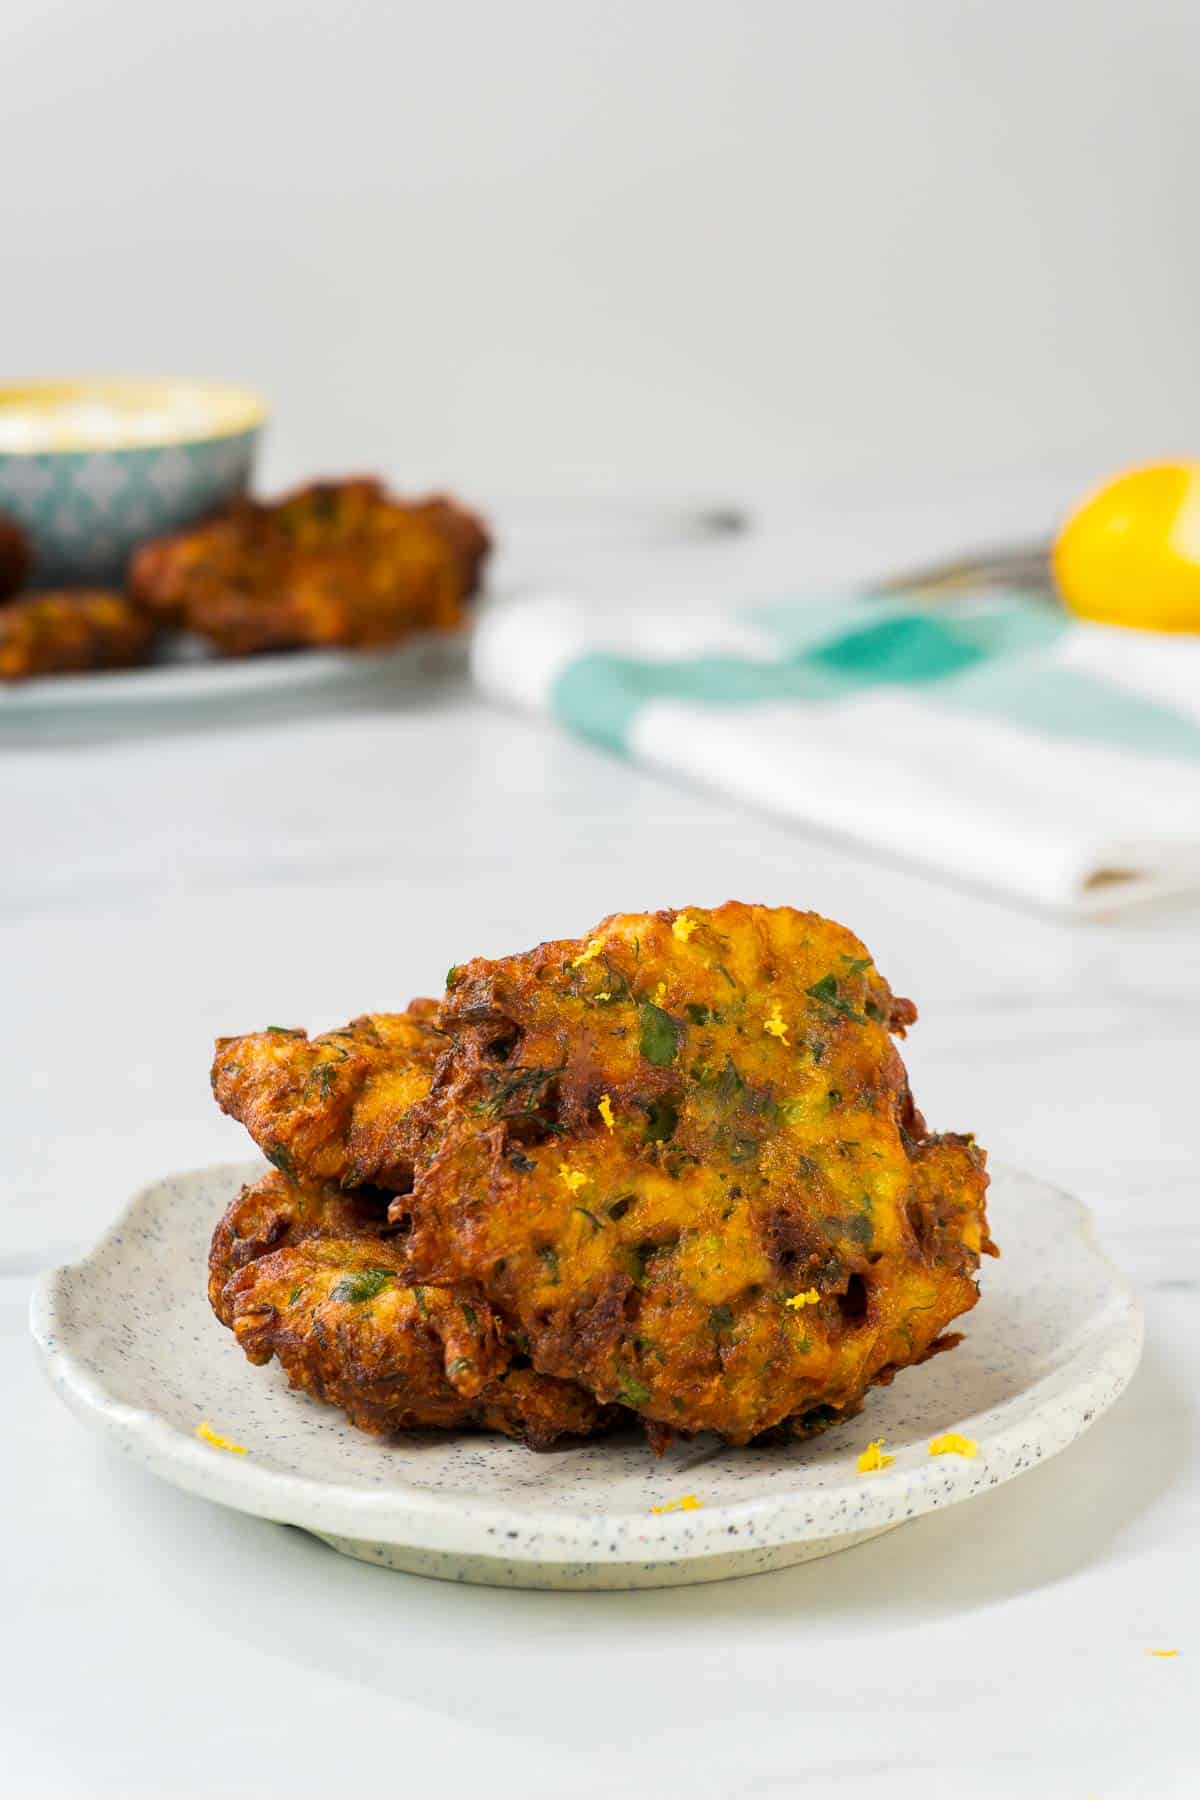 Two mucver pieces on a white dish. There is some lemon zest sprinkled atop the fritters.